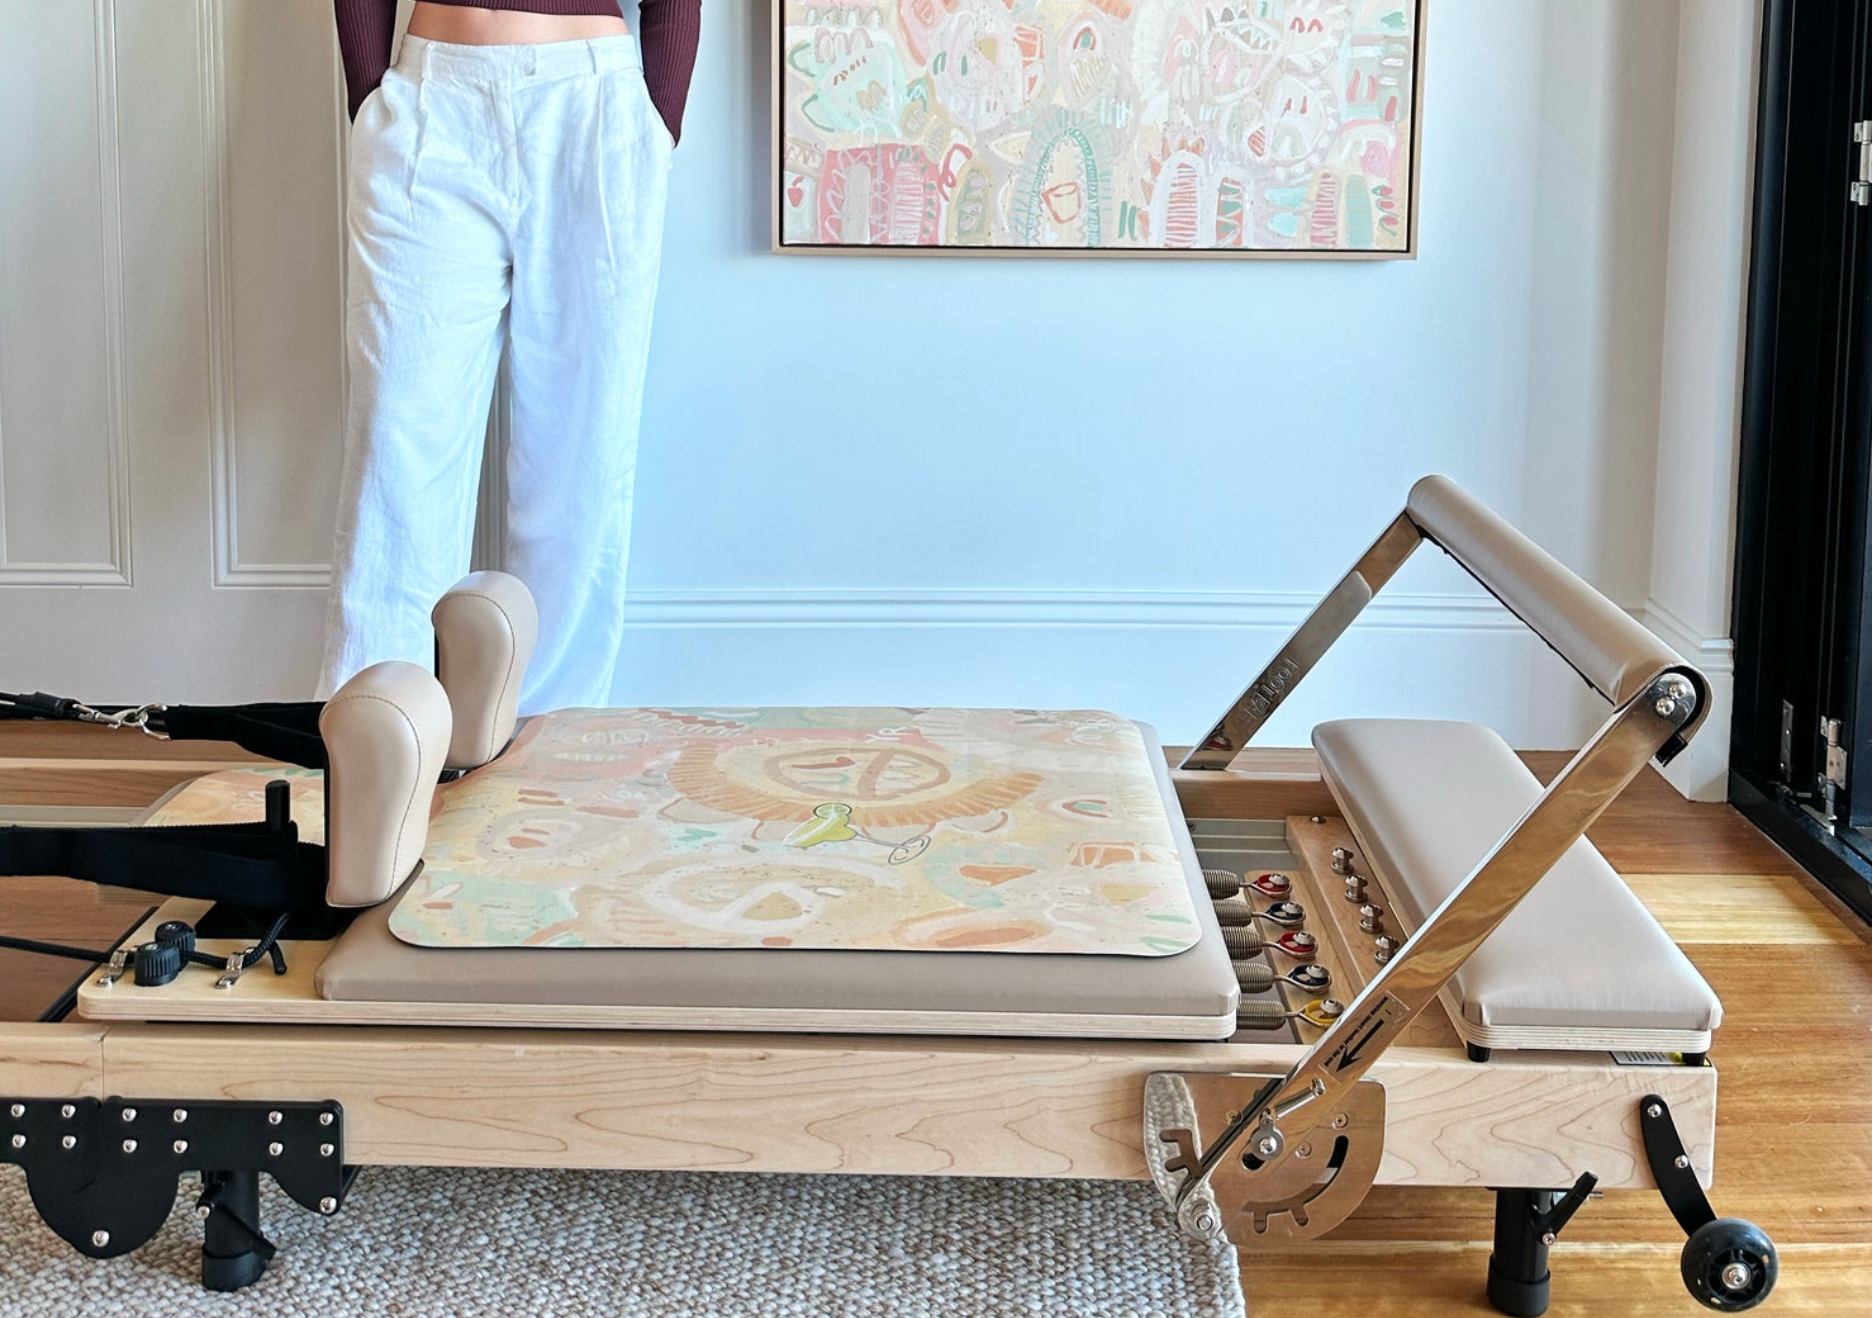 Zoii - Here's how you could win a stylish Your Reformer Pilates bed for home